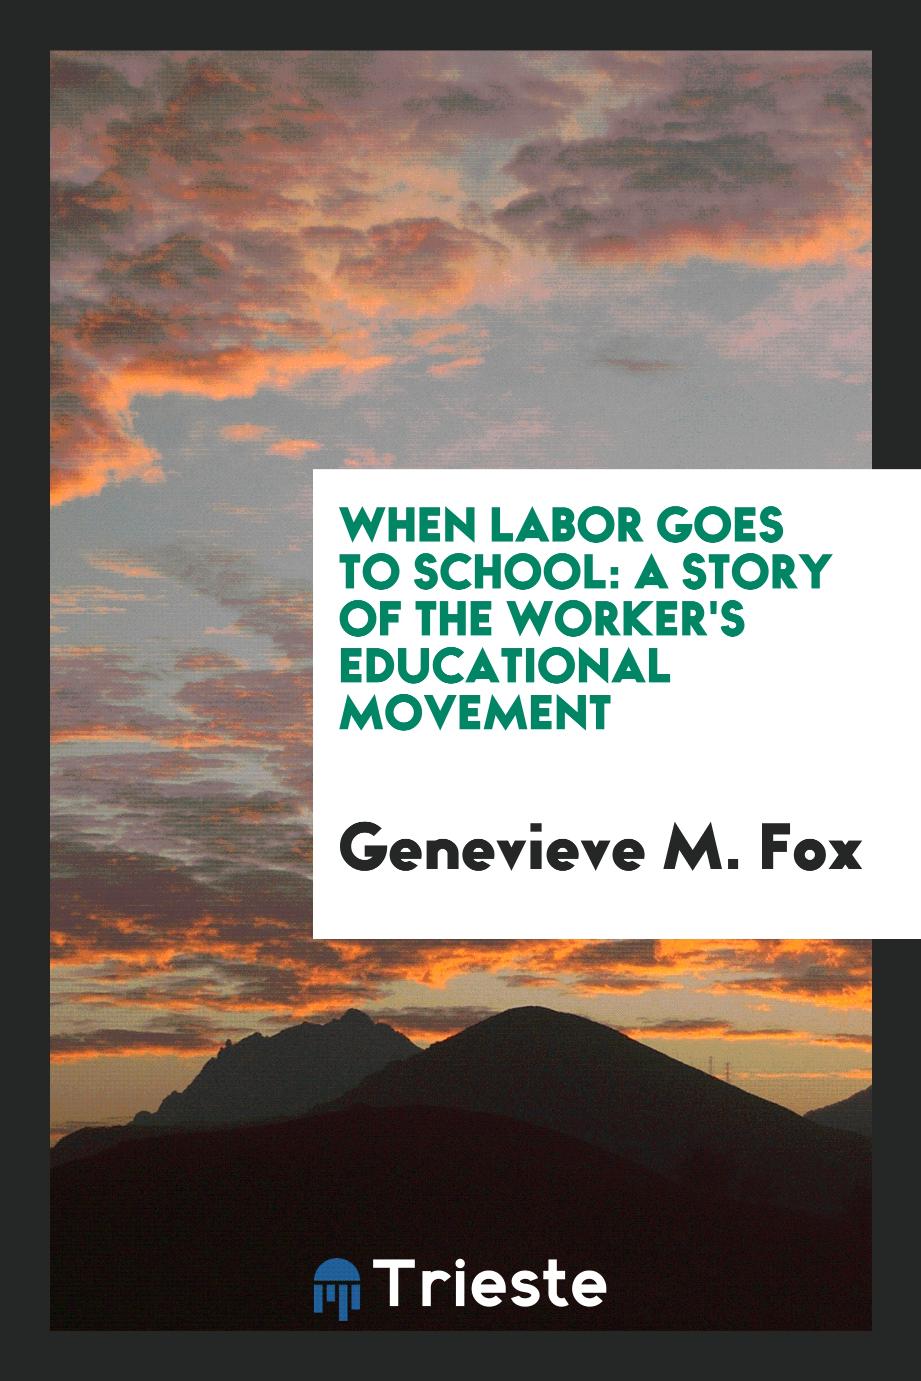 When Labor Goes to School: A Story of the Worker's Educational Movement